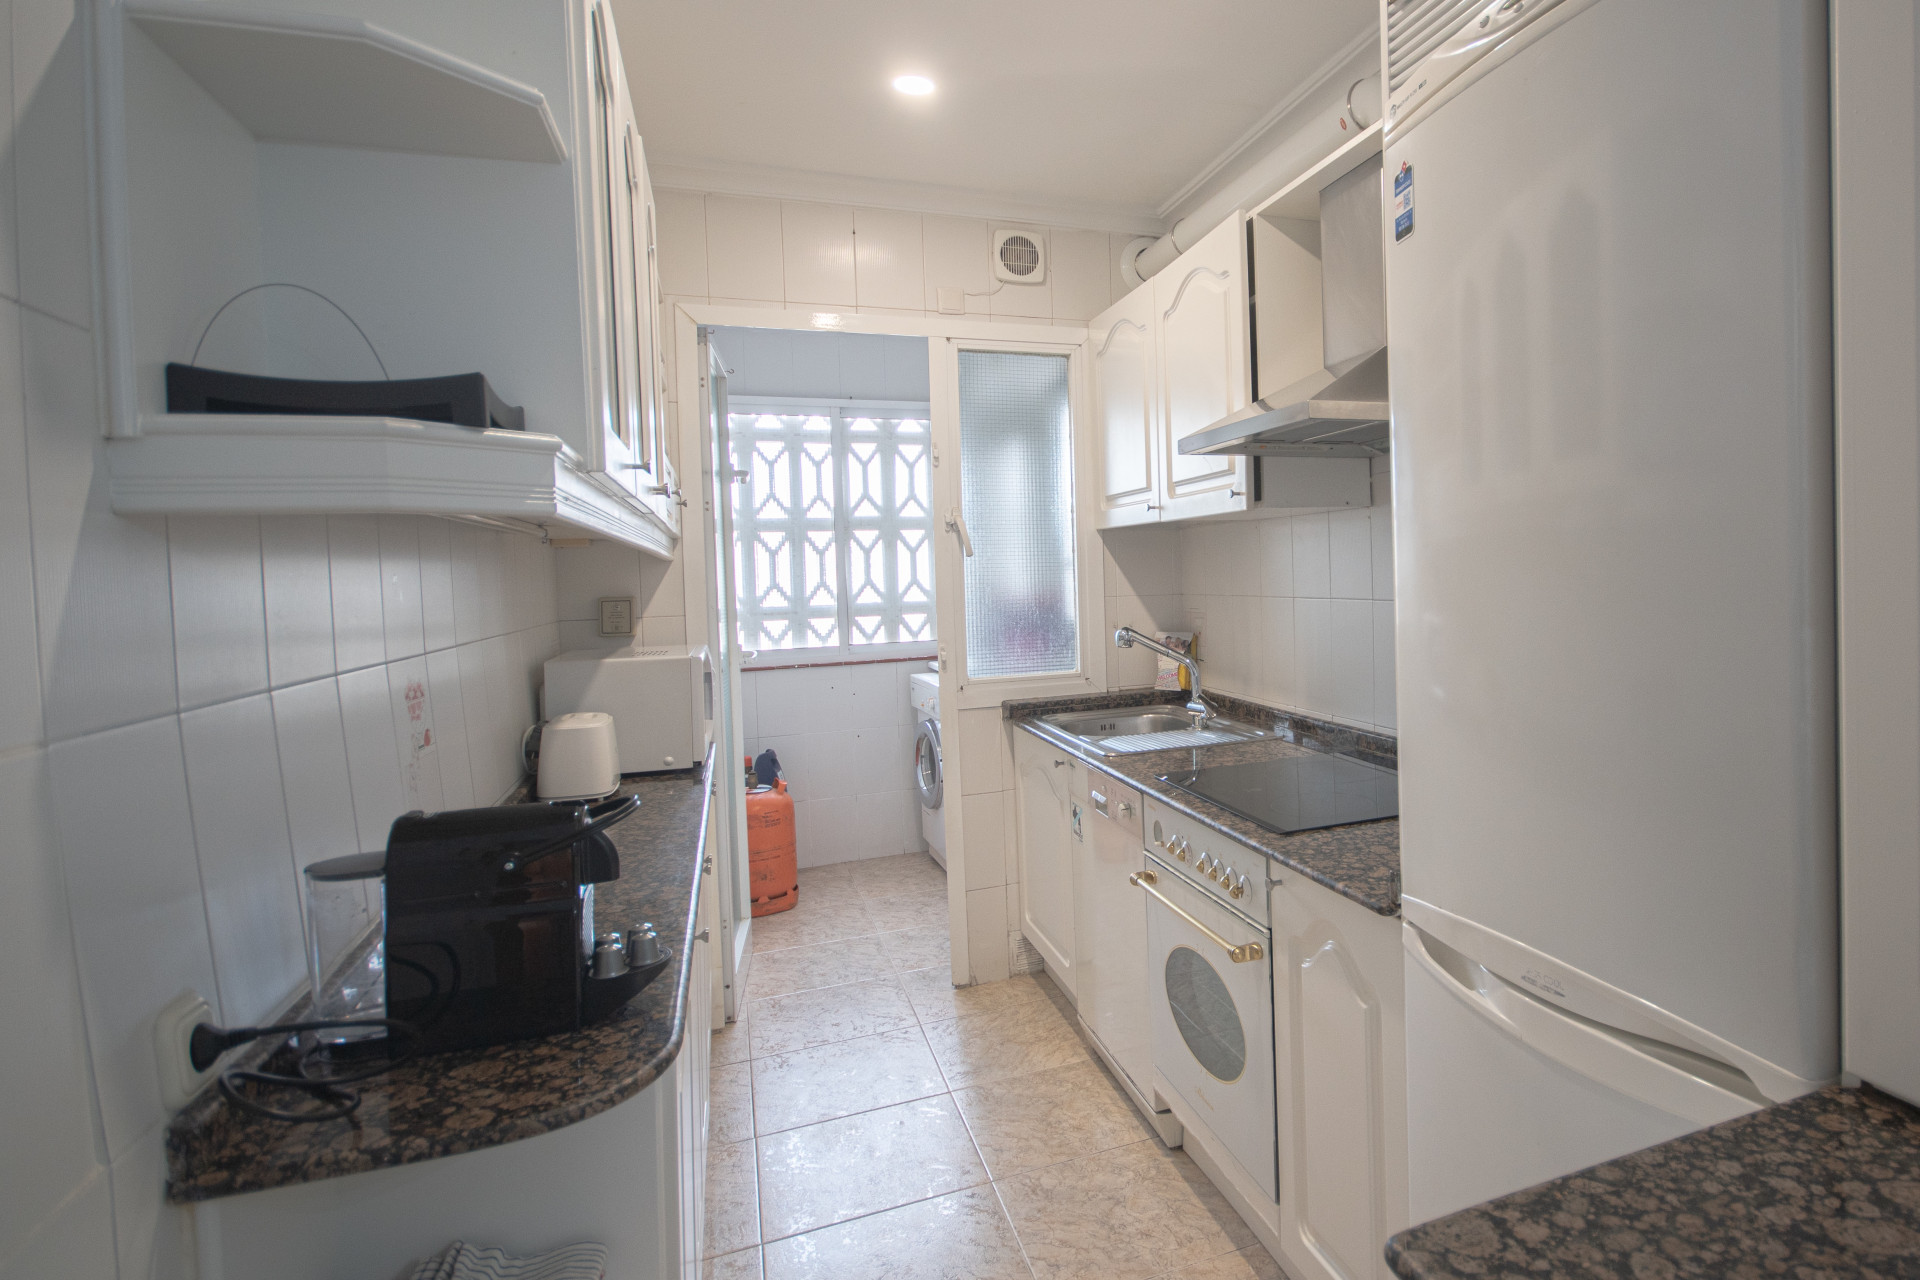 Newly renovated 3 bedroom apartment in the Center of Marbella